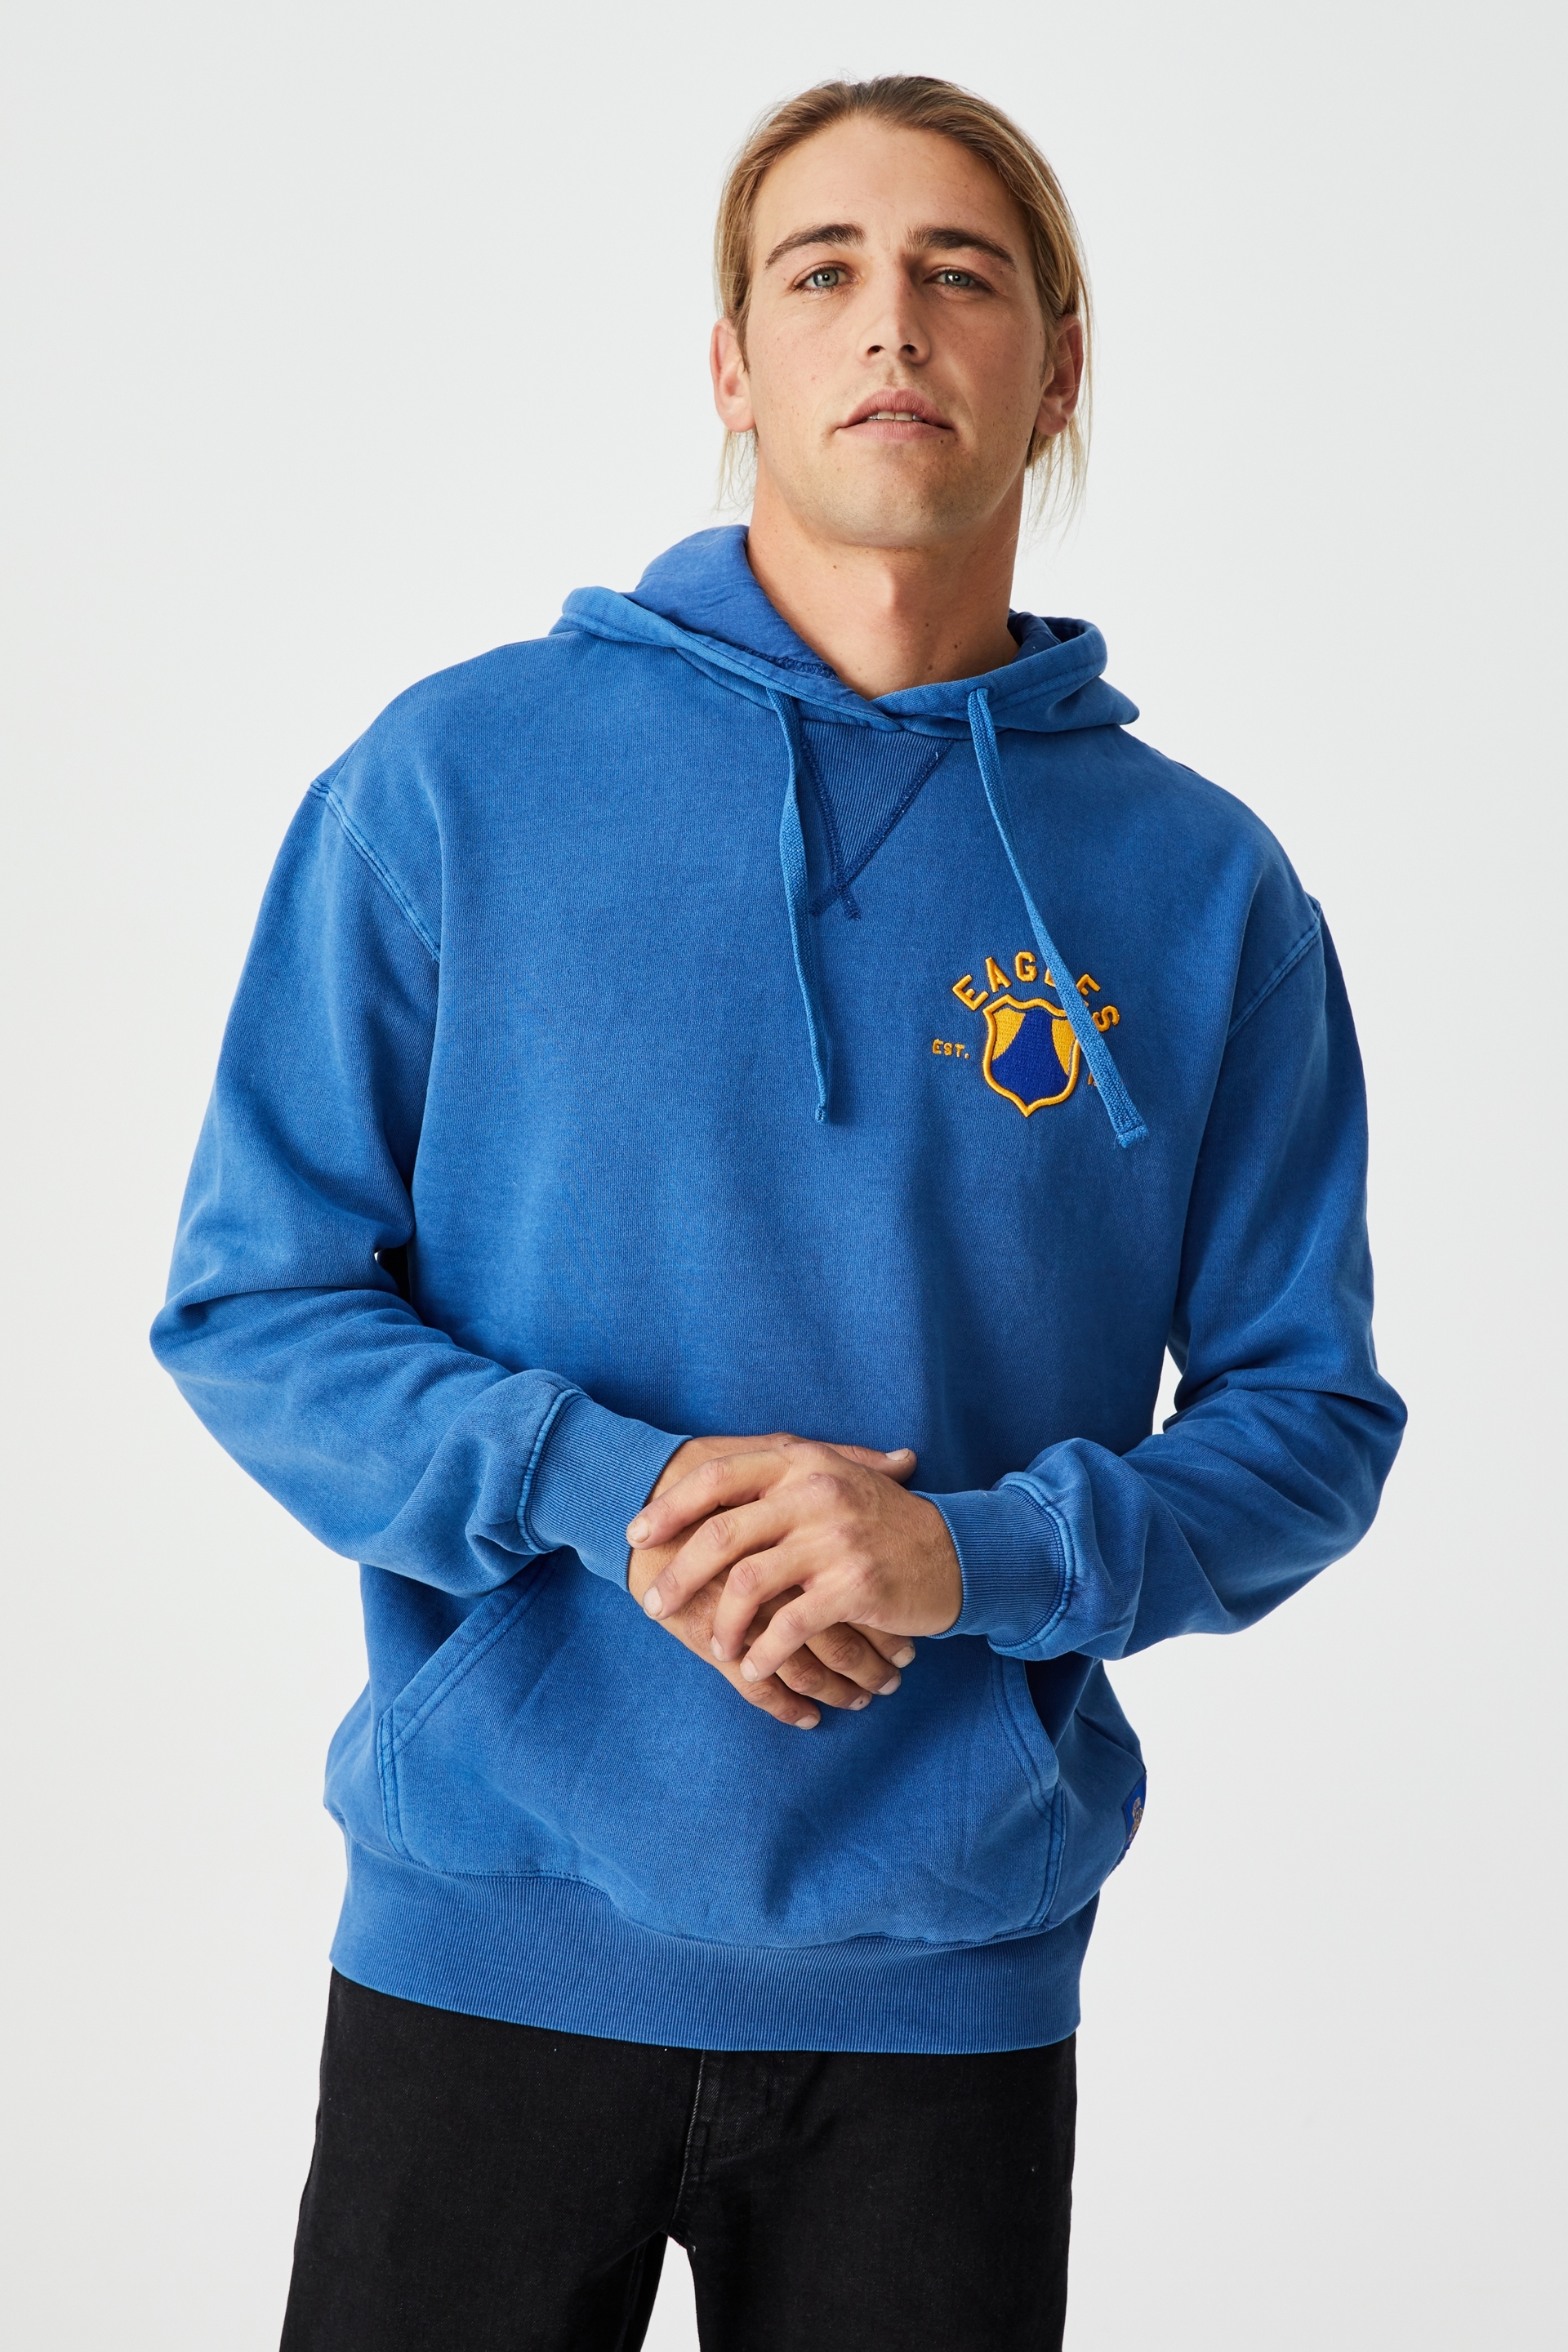 AFL - Afl Mens Chest Embroidery Hoodie - West coast